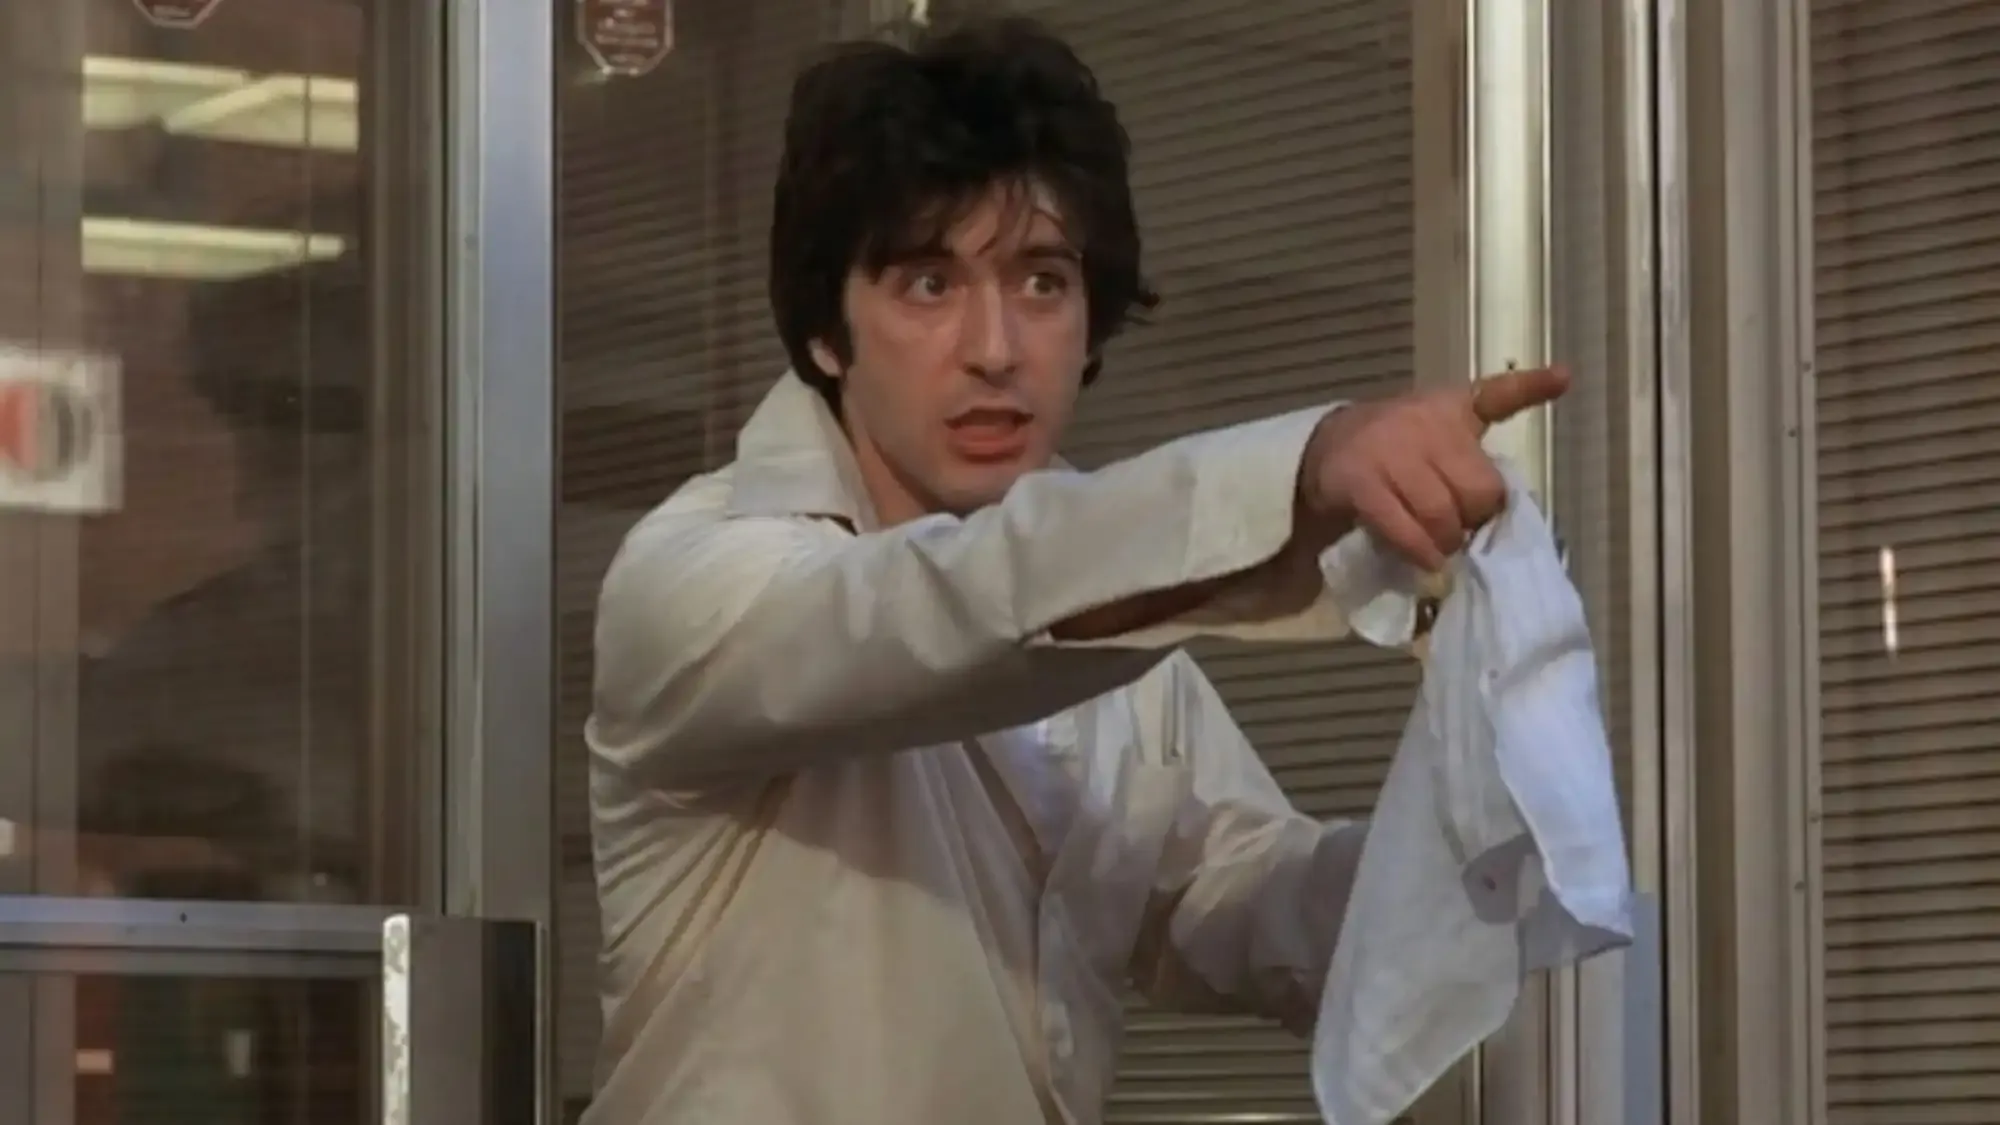 Dog Day Afternoon movie review